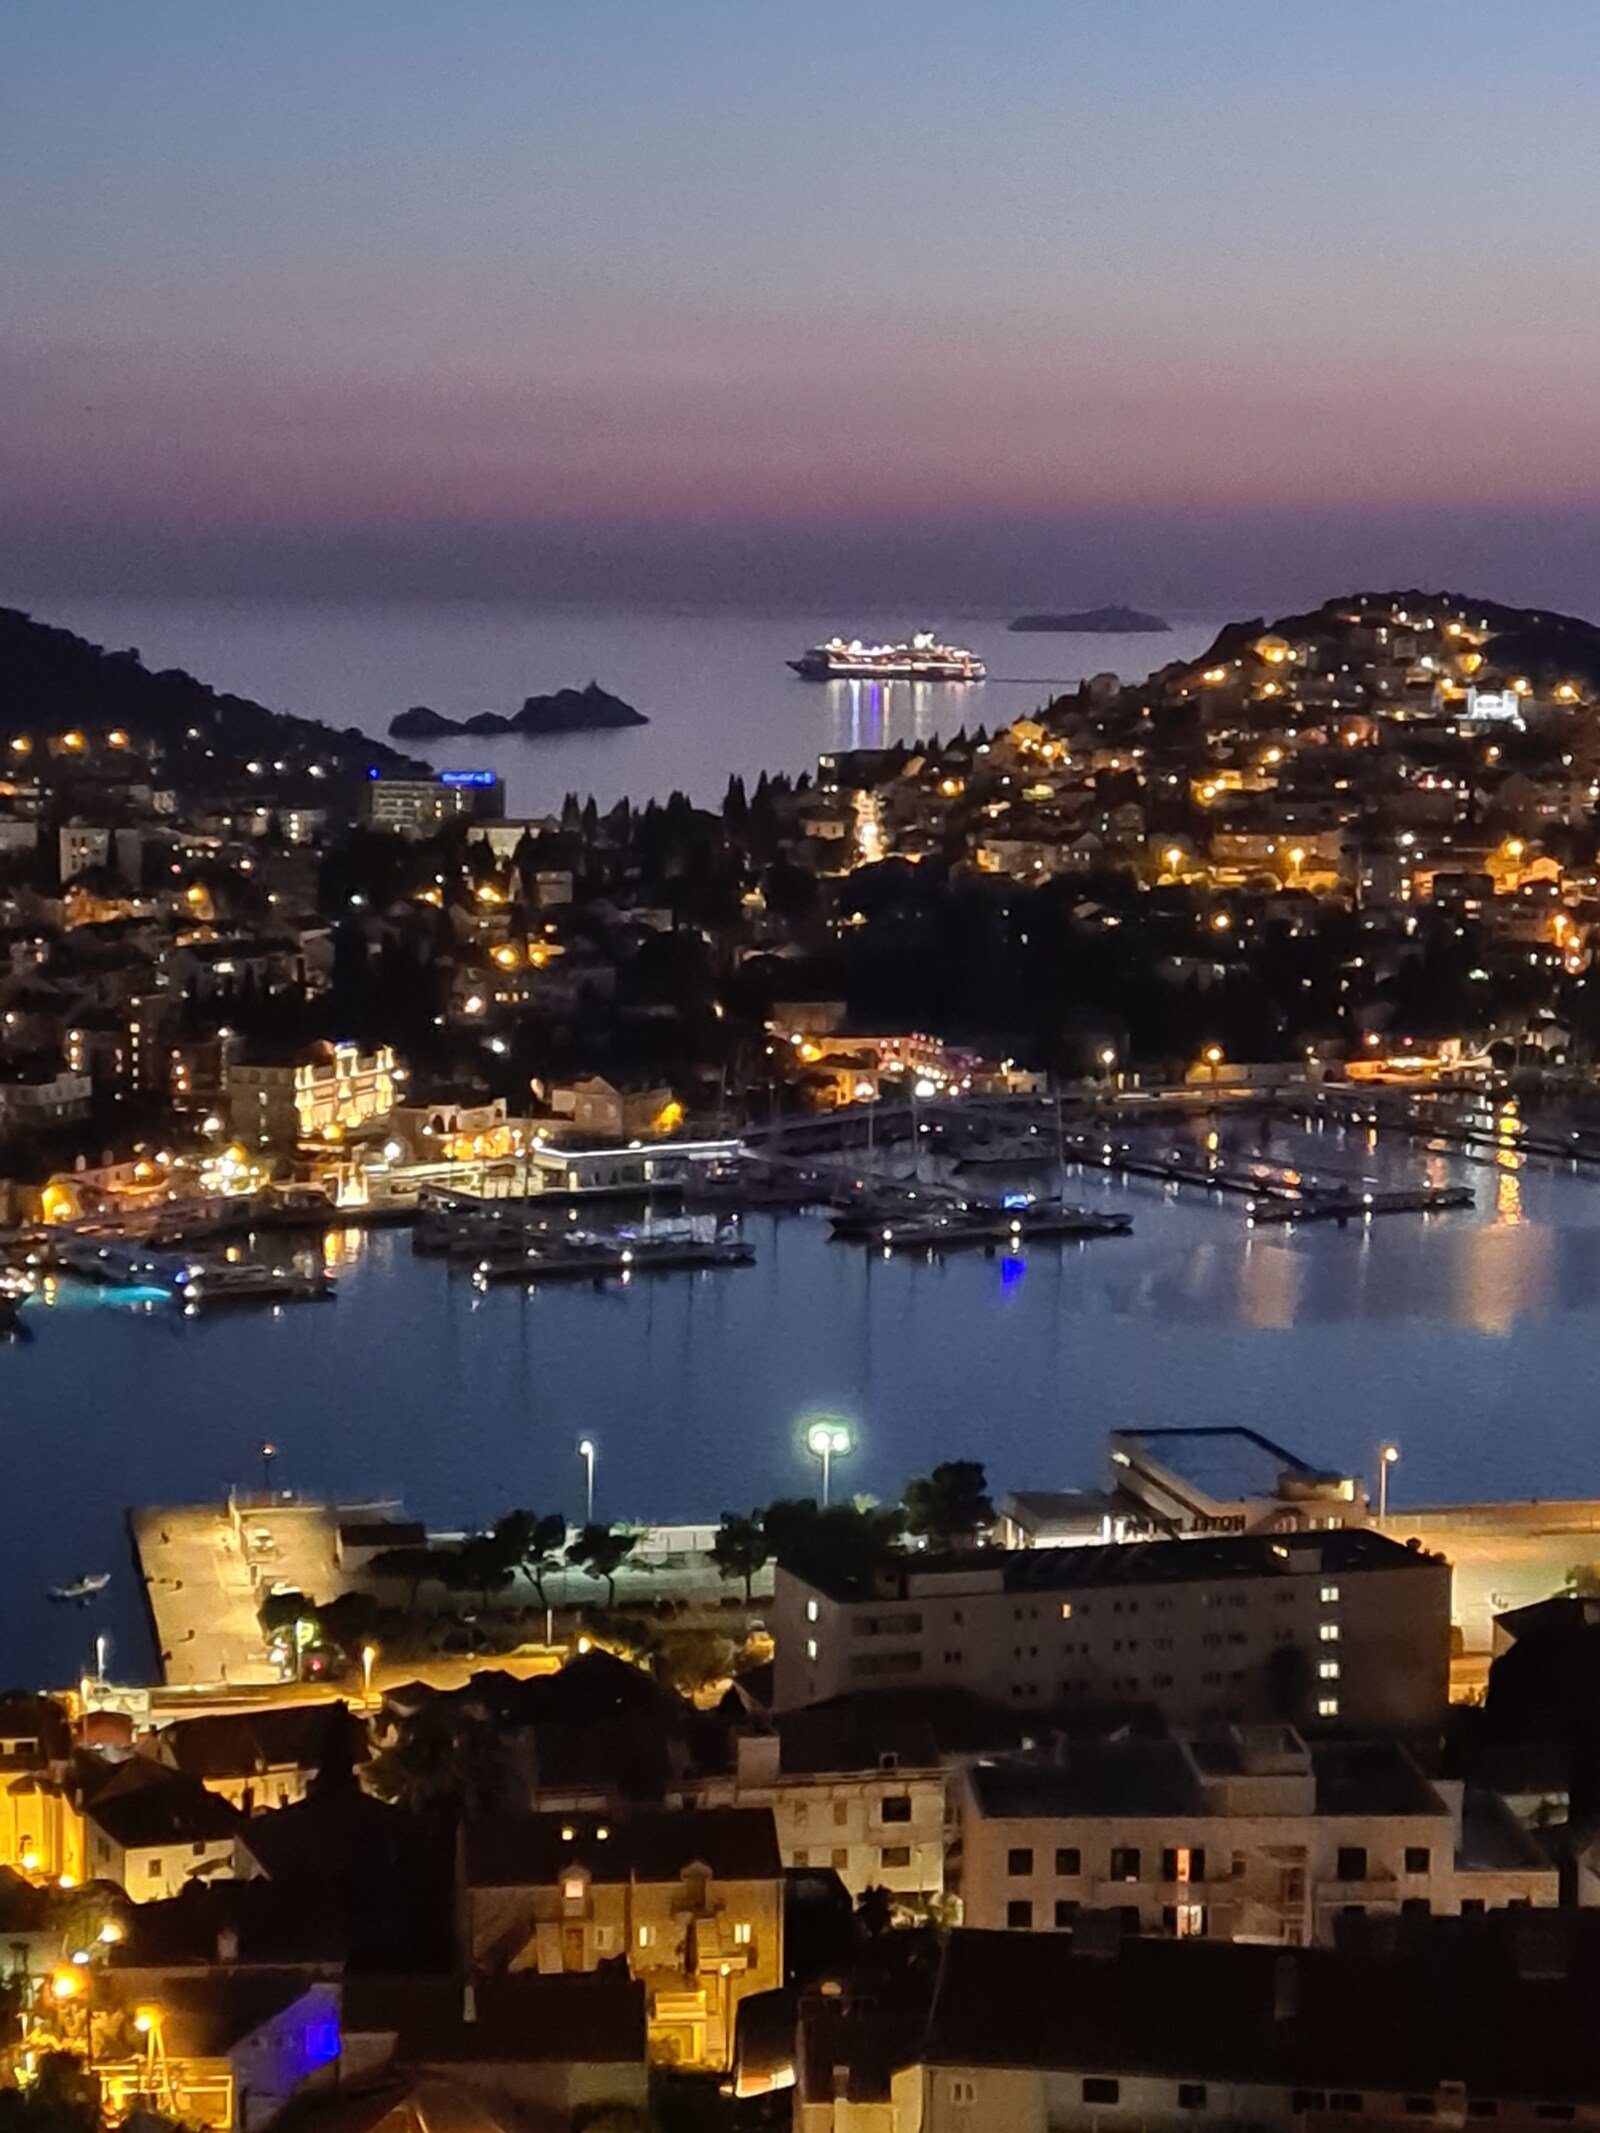 A view of hills between two bodies of water with many lit up houses and a marina at night. A lit up cruise ship is in the distance